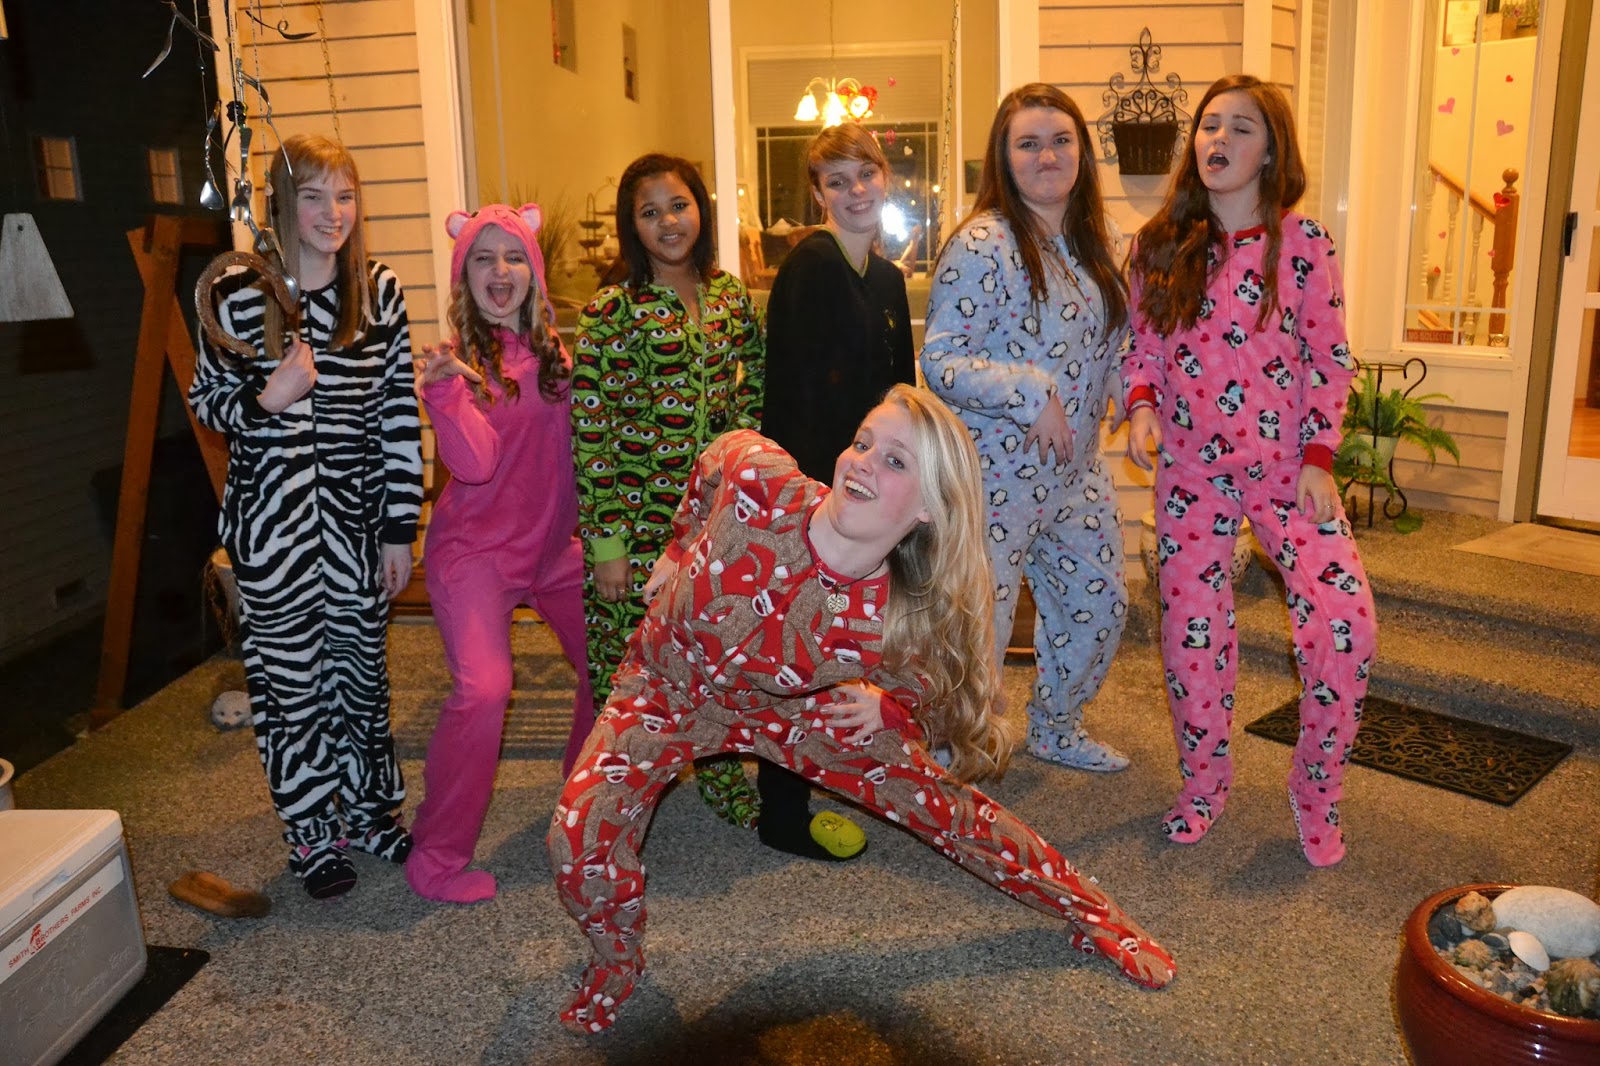 Arlie turned 15 and had a sleepover party - footie pajamas required! 